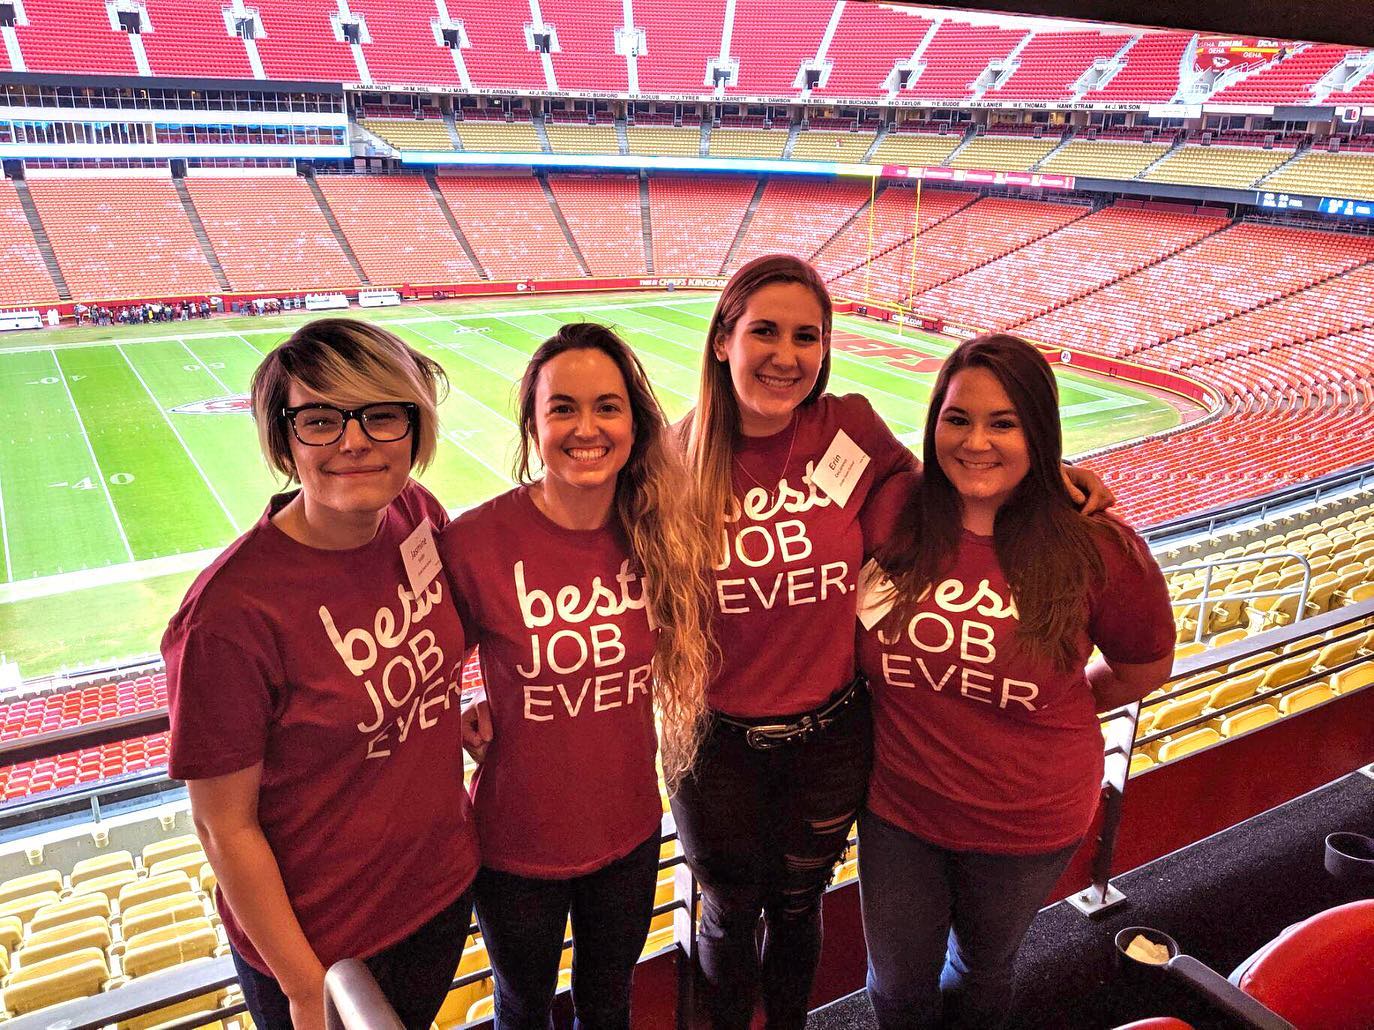 Four members of the Emler team at a Kansas City Chiefs game wearing red Best Job Ever shirts